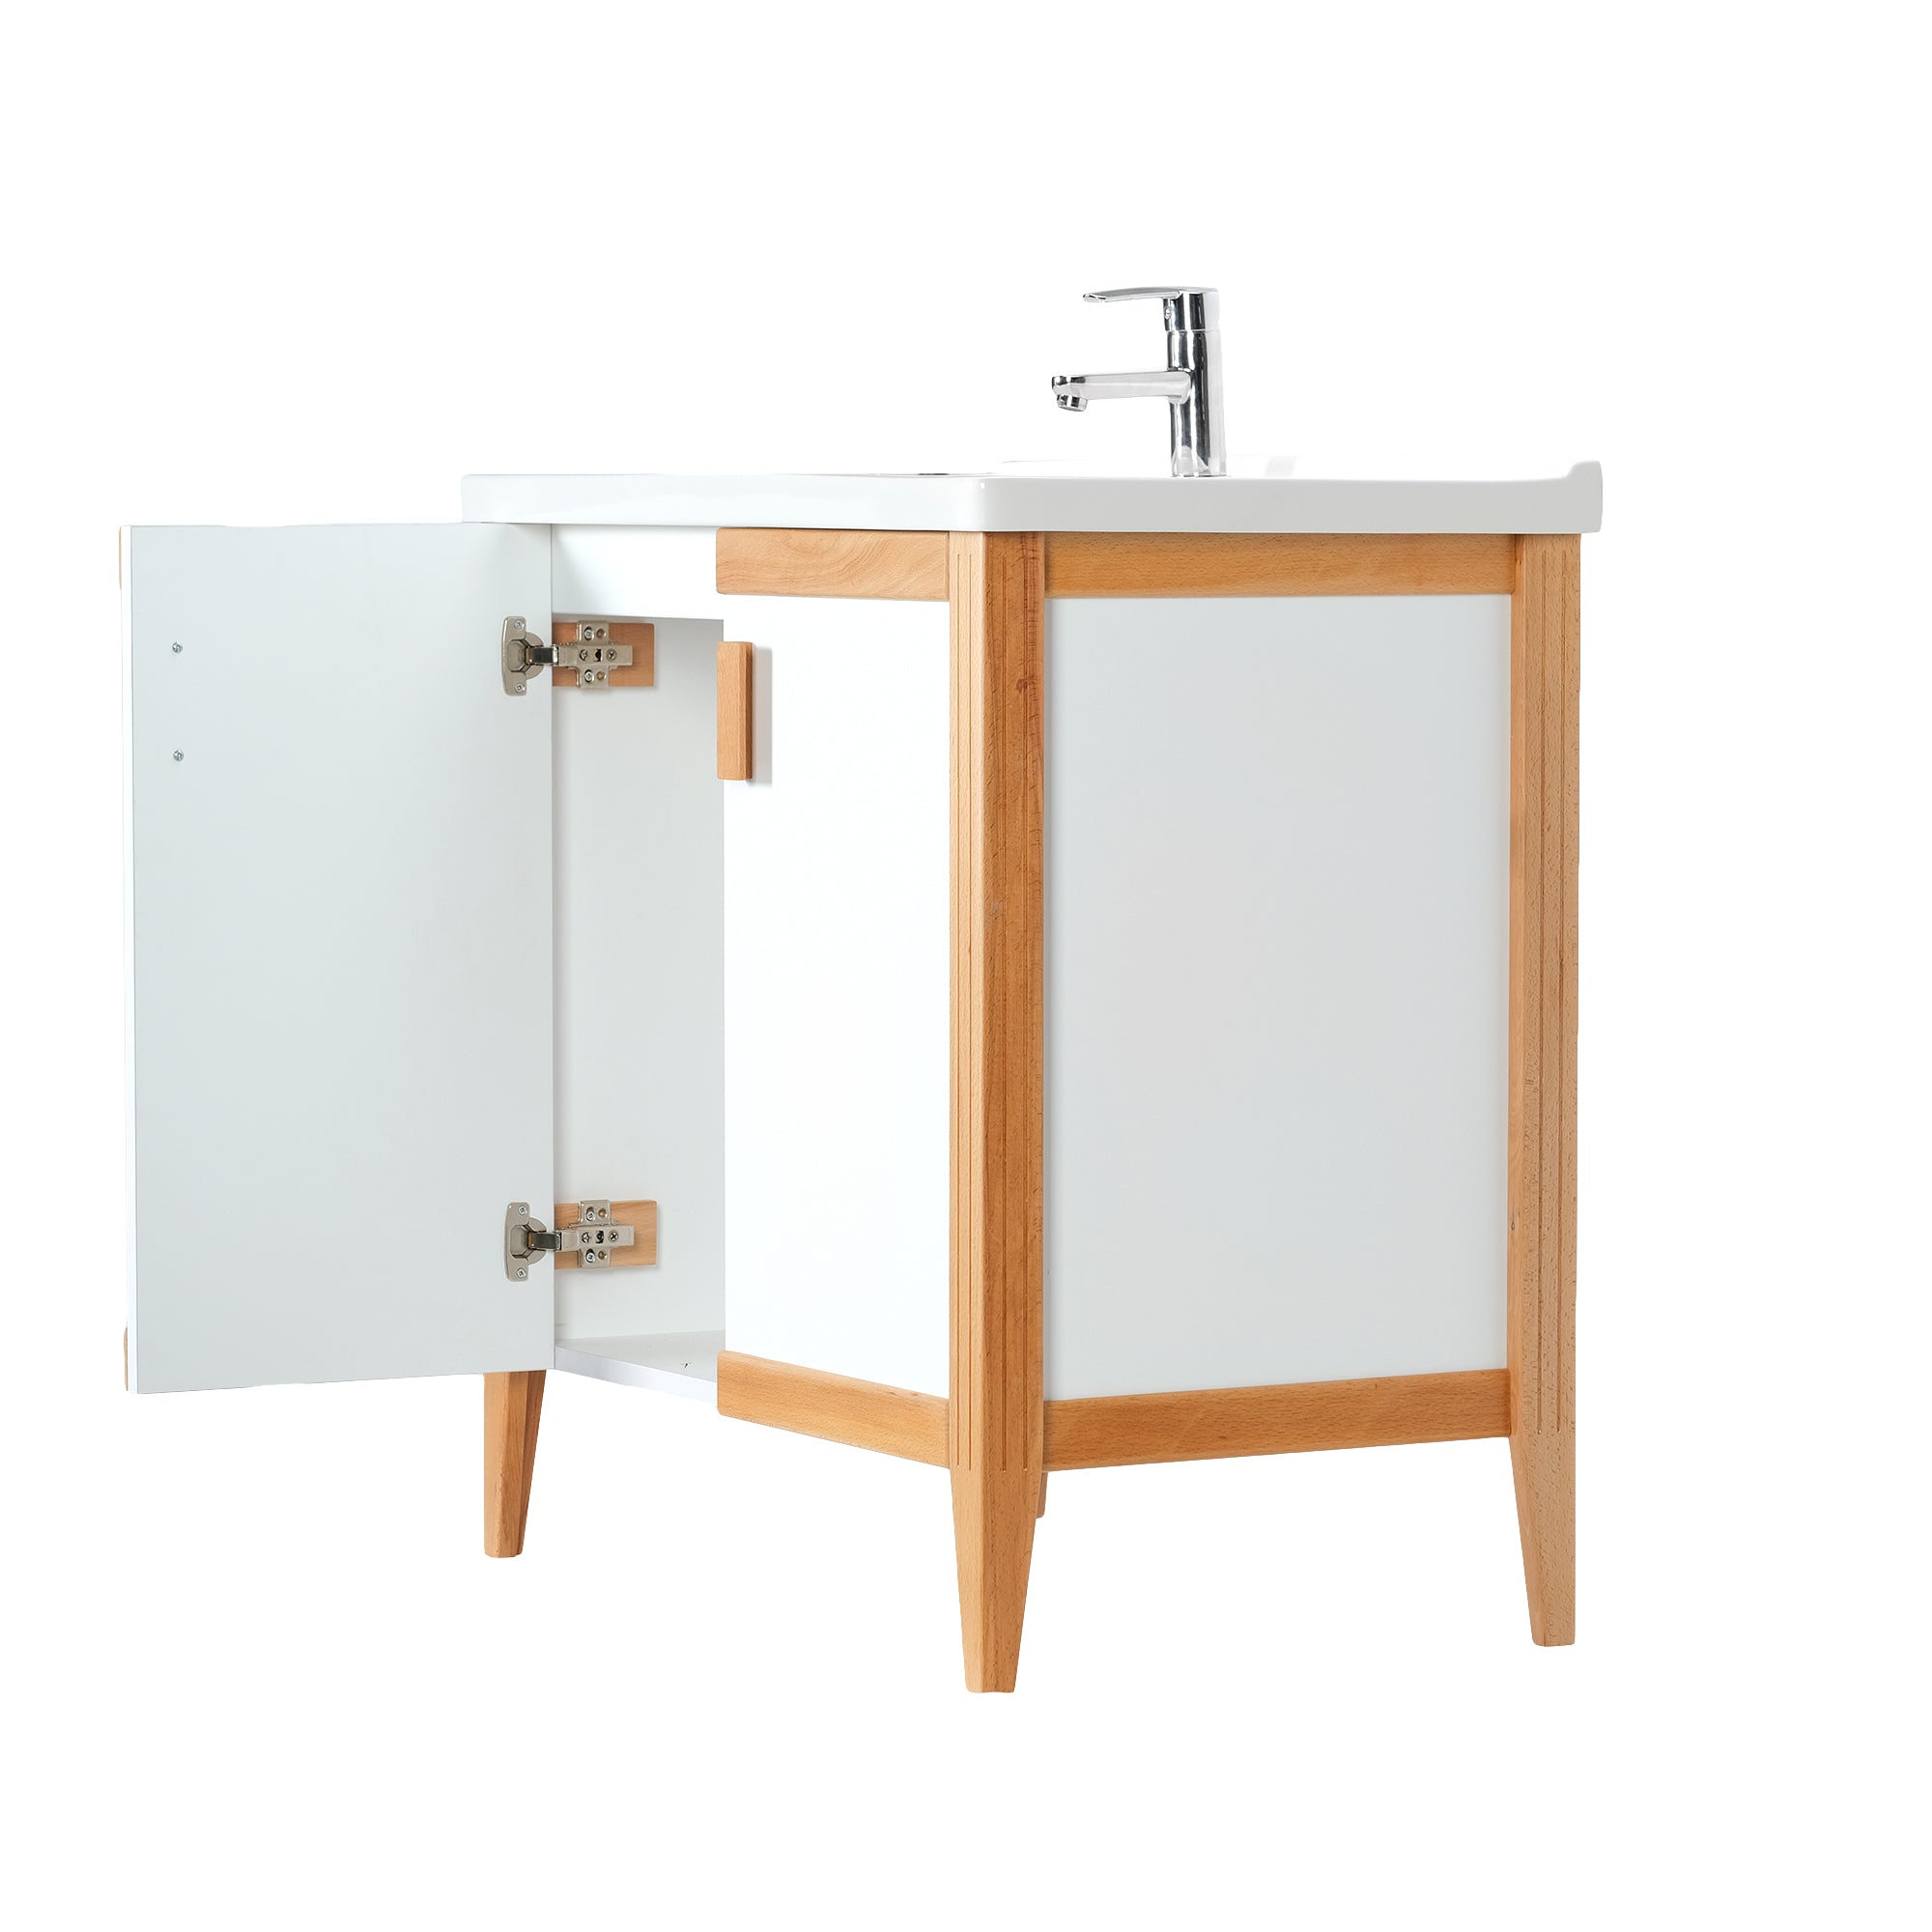 MADRID 32 INCH FREE STANDING VANITY AND SINK COMBO -  WHITE & OAK